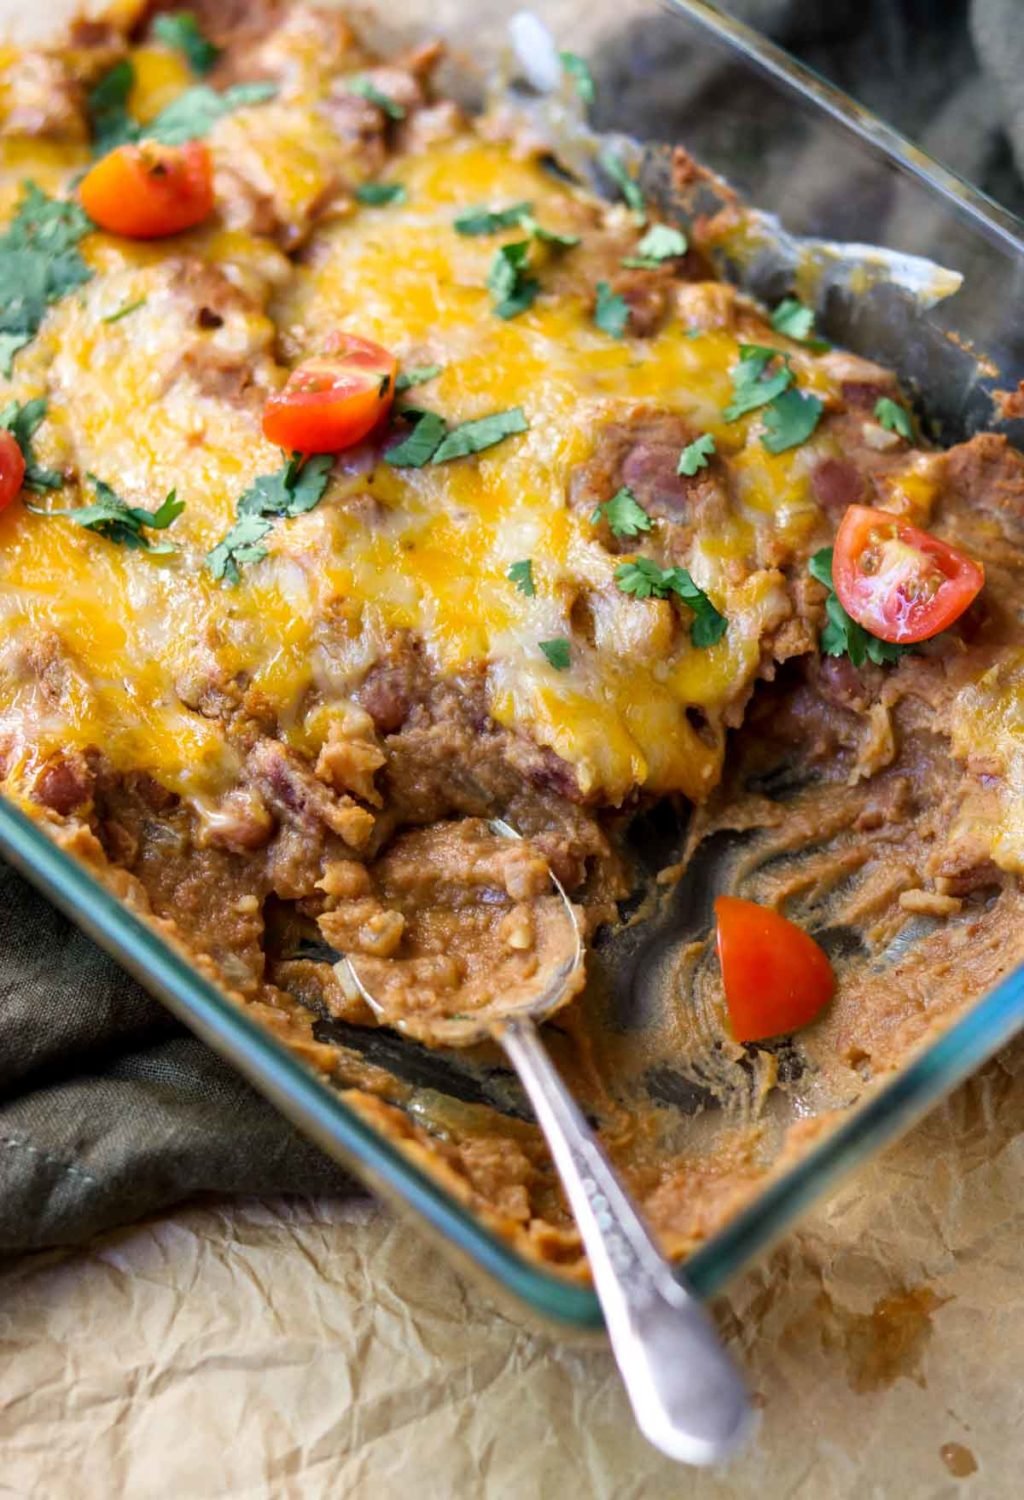 A baking dish of refried beans topped with cheese, cilantro and tomatoes